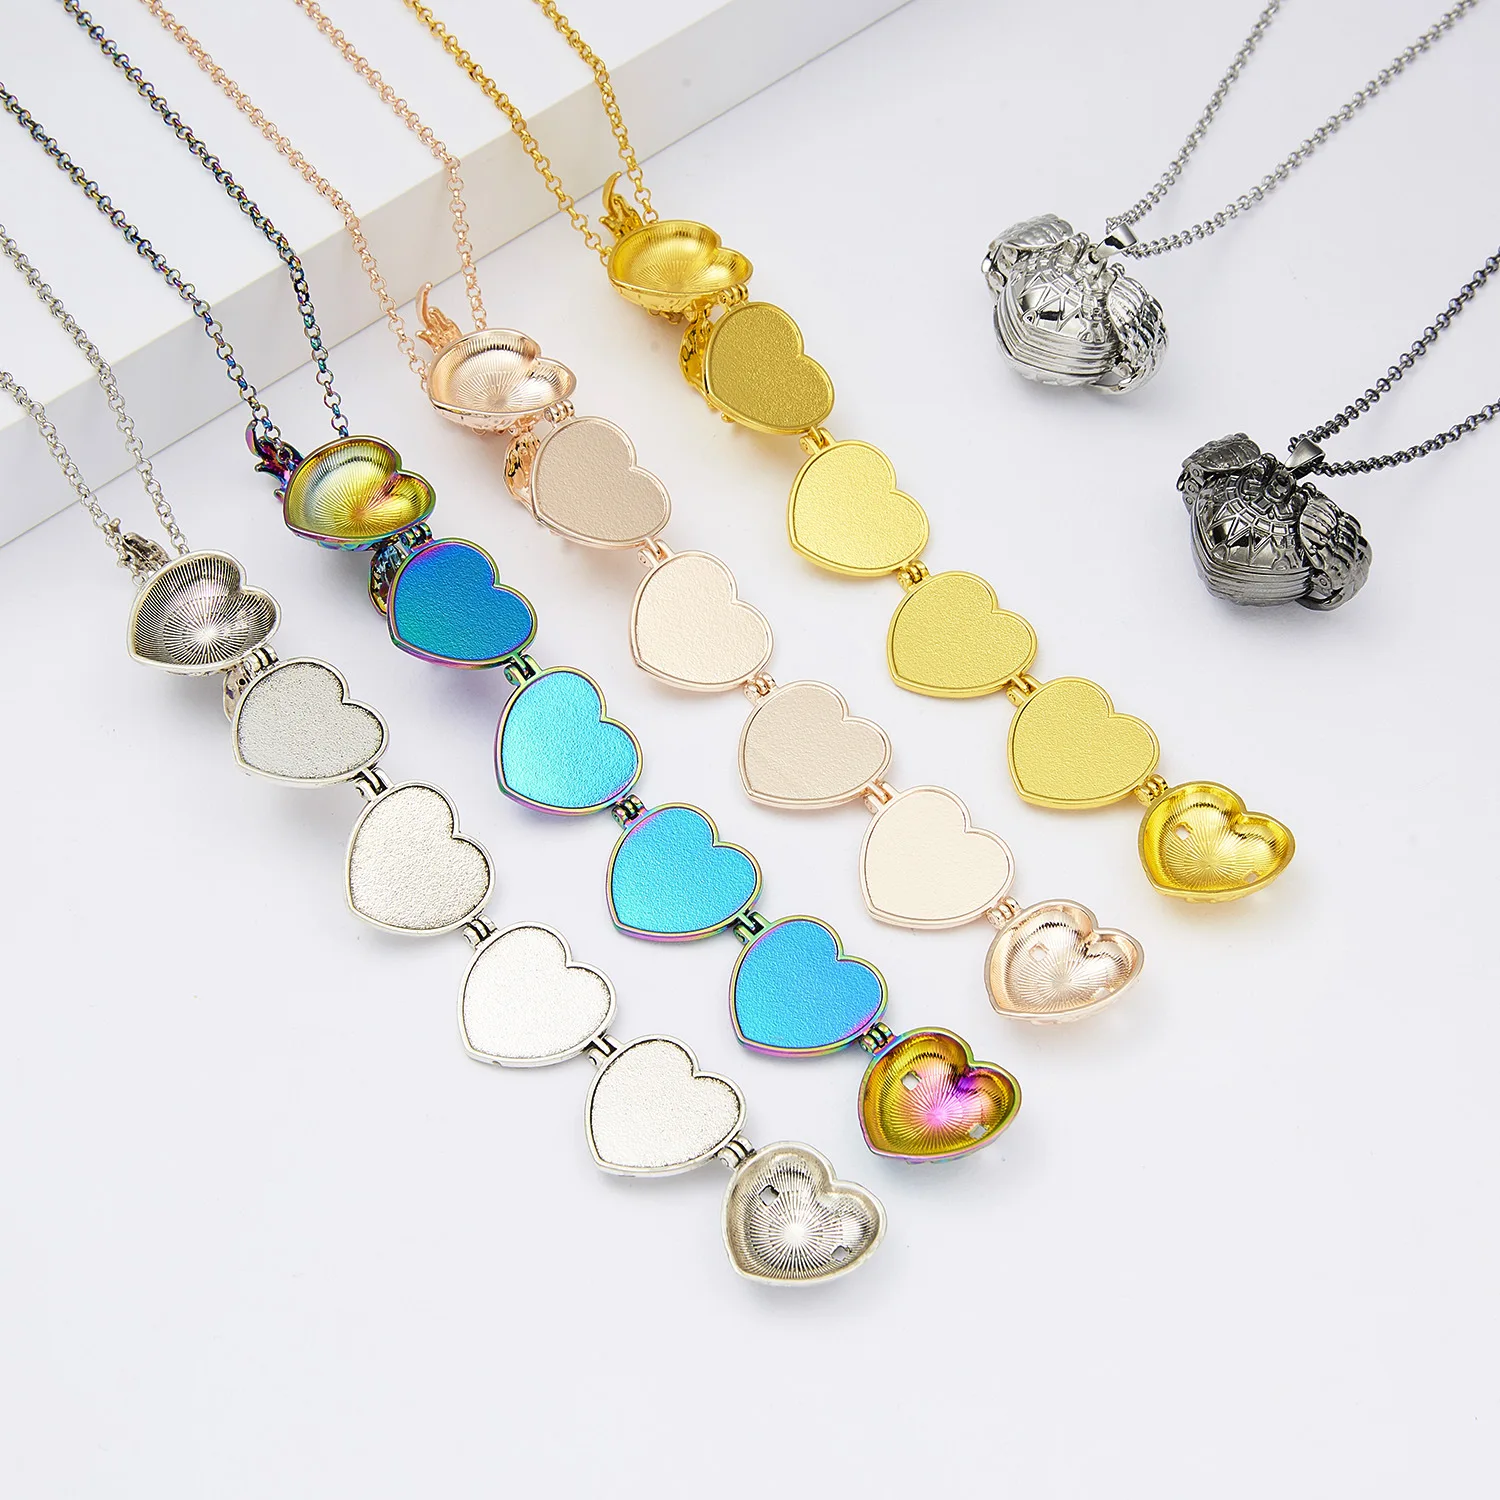 

New Style Sublimation Blank Folding Heart Shape Angle Wings Jewelry Necklace 5 Colors For Choosing, Gold/sliver/rose gold/gun black/old sliver